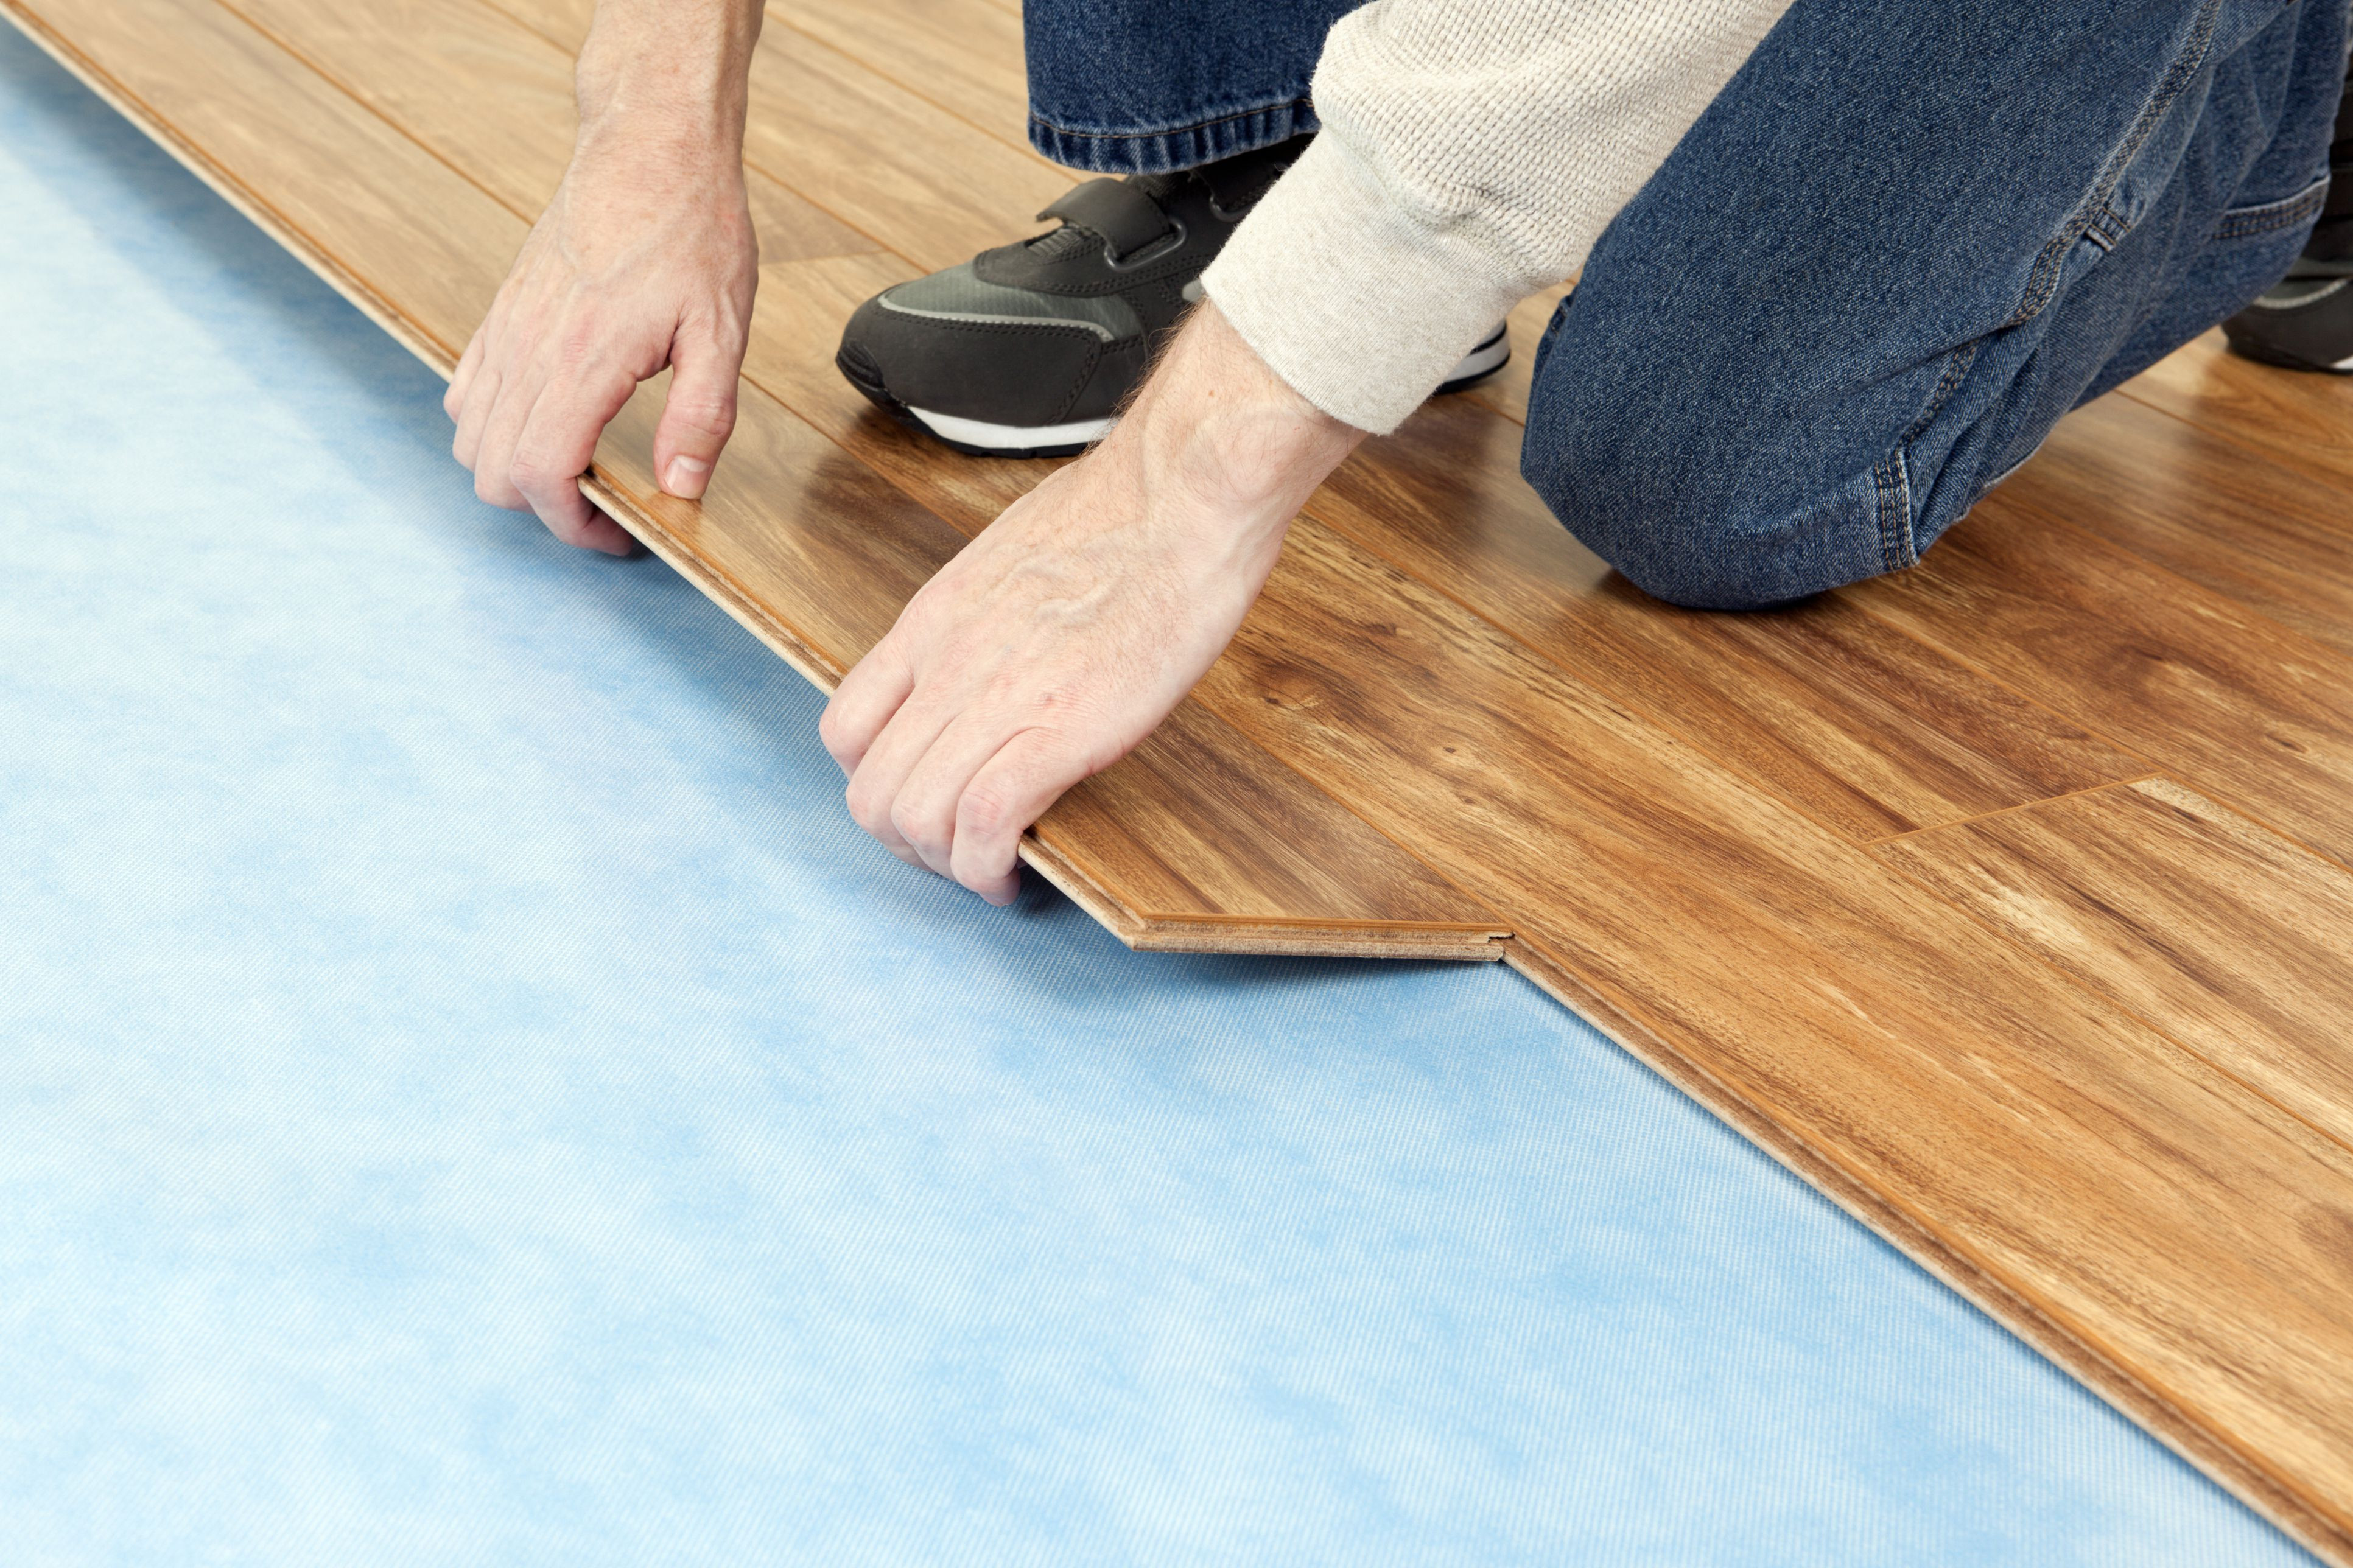 10 Unique Hardwood Flooring Types Pros and Cons 2024 free download hardwood flooring types pros and cons of flooring underlayment the basics intended for new floor installation 185270632 582b722c3df78c6f6af0a8ab